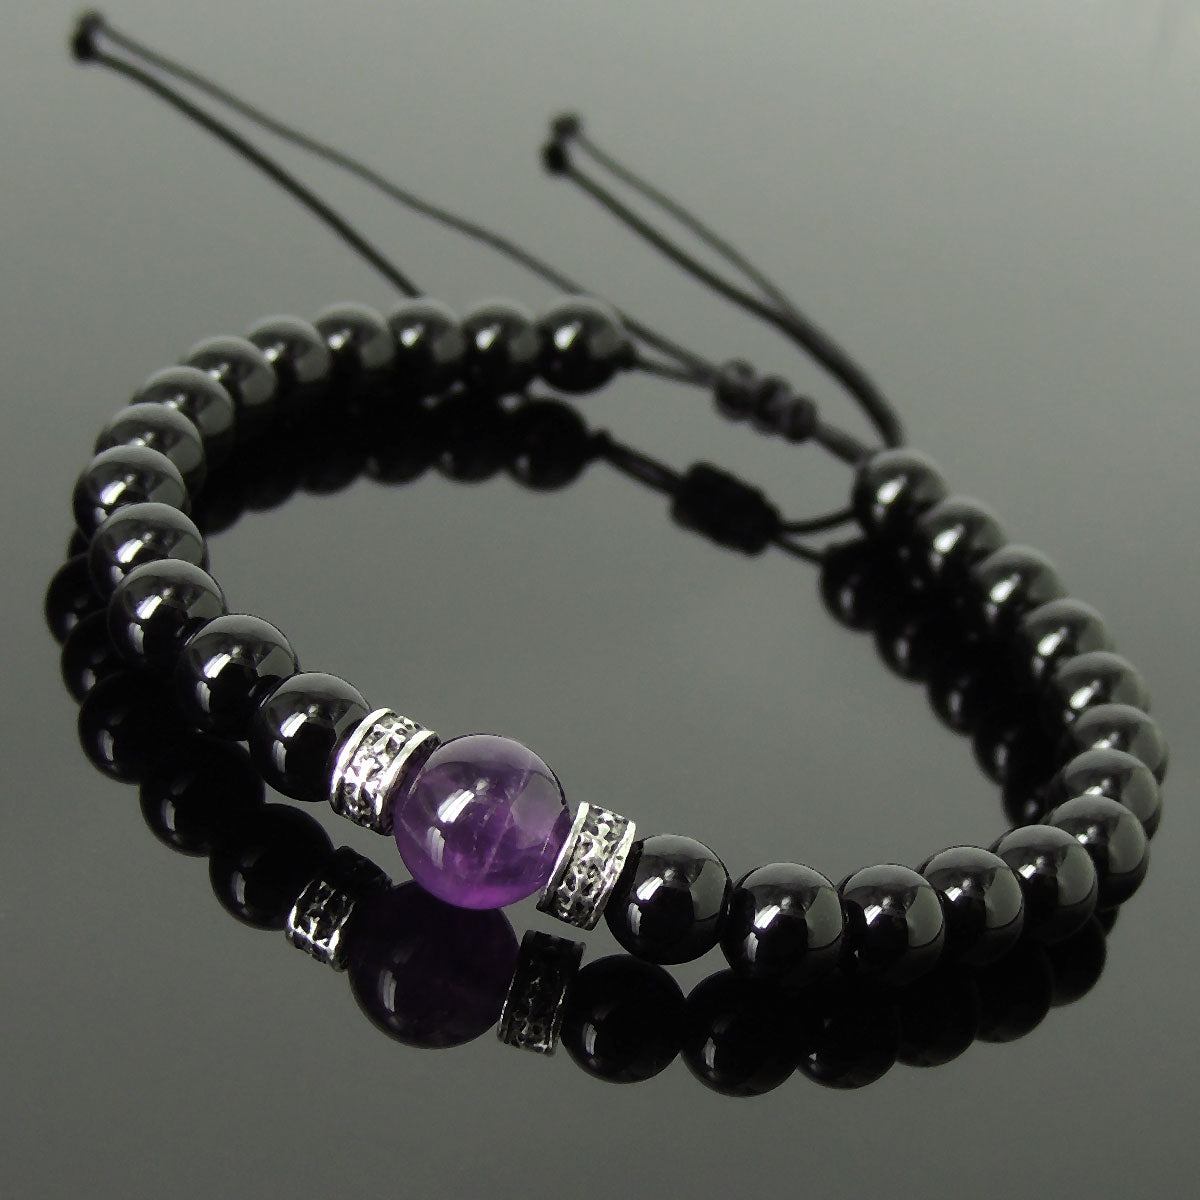 Amethyst & Bright Black Onyx Adjustable Braided Bracelet with S925 Sterling Silver Celtic Cross Spacer Charms - Handmade by Gem & Silver BR1212